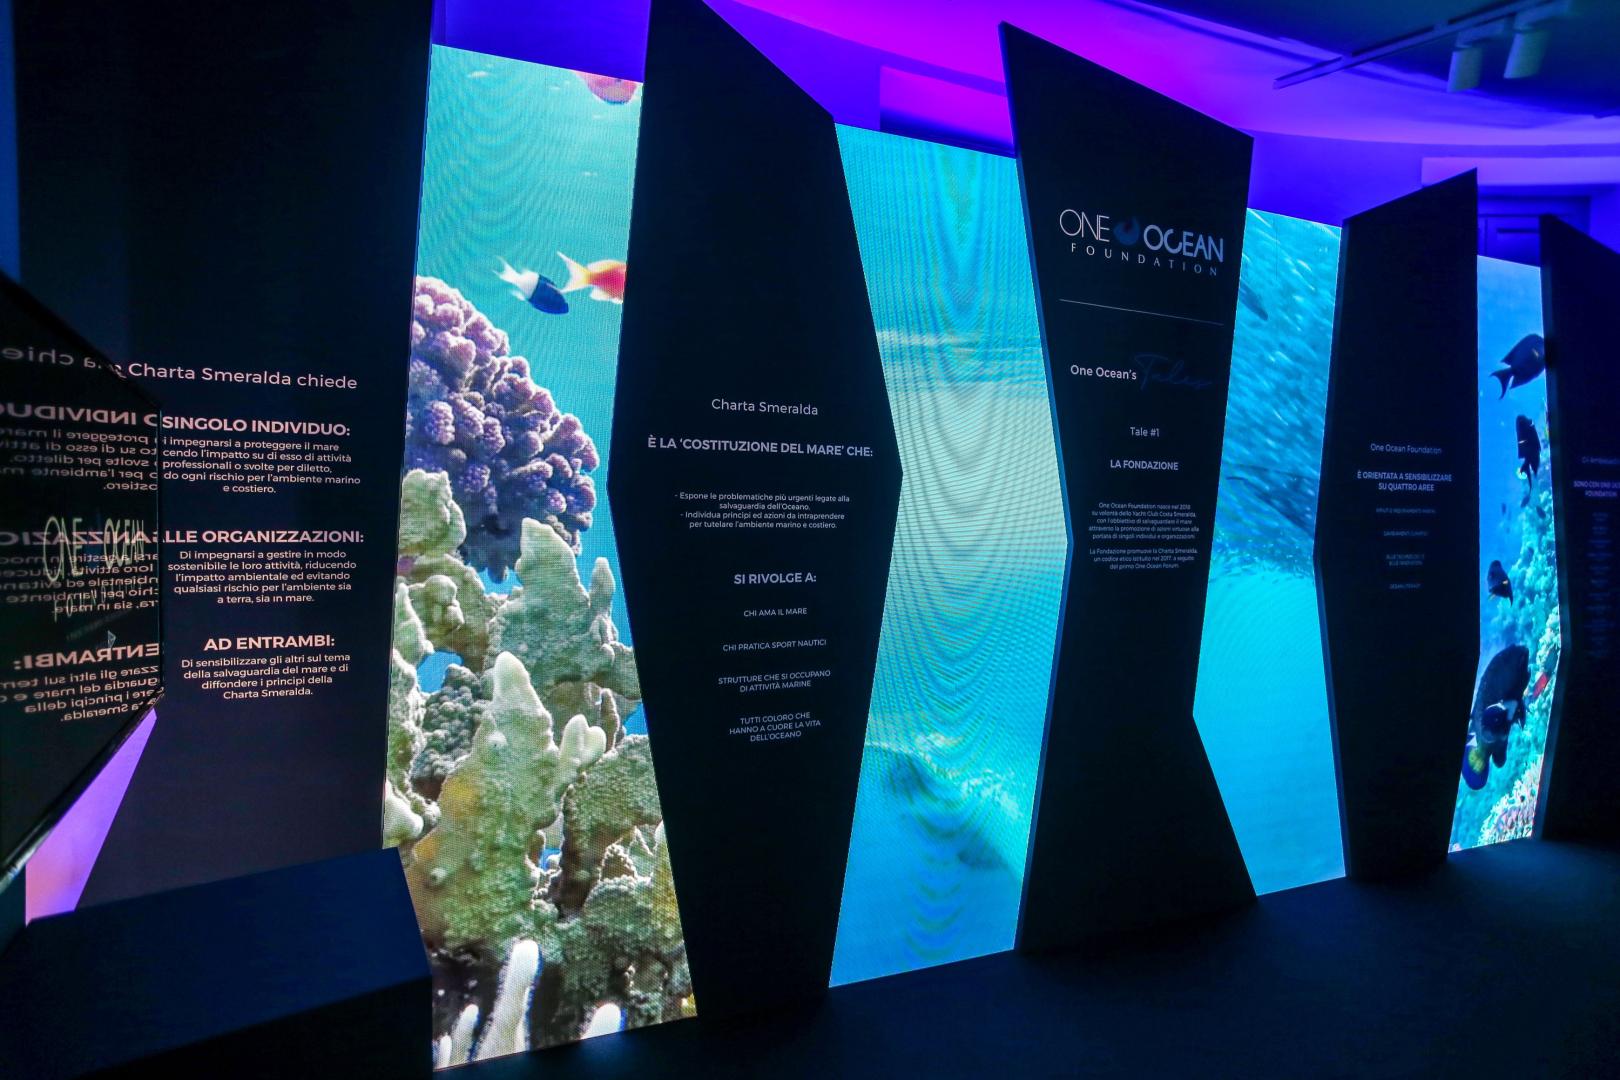 One Ocean Foundation promuove “Changing the Course of the River